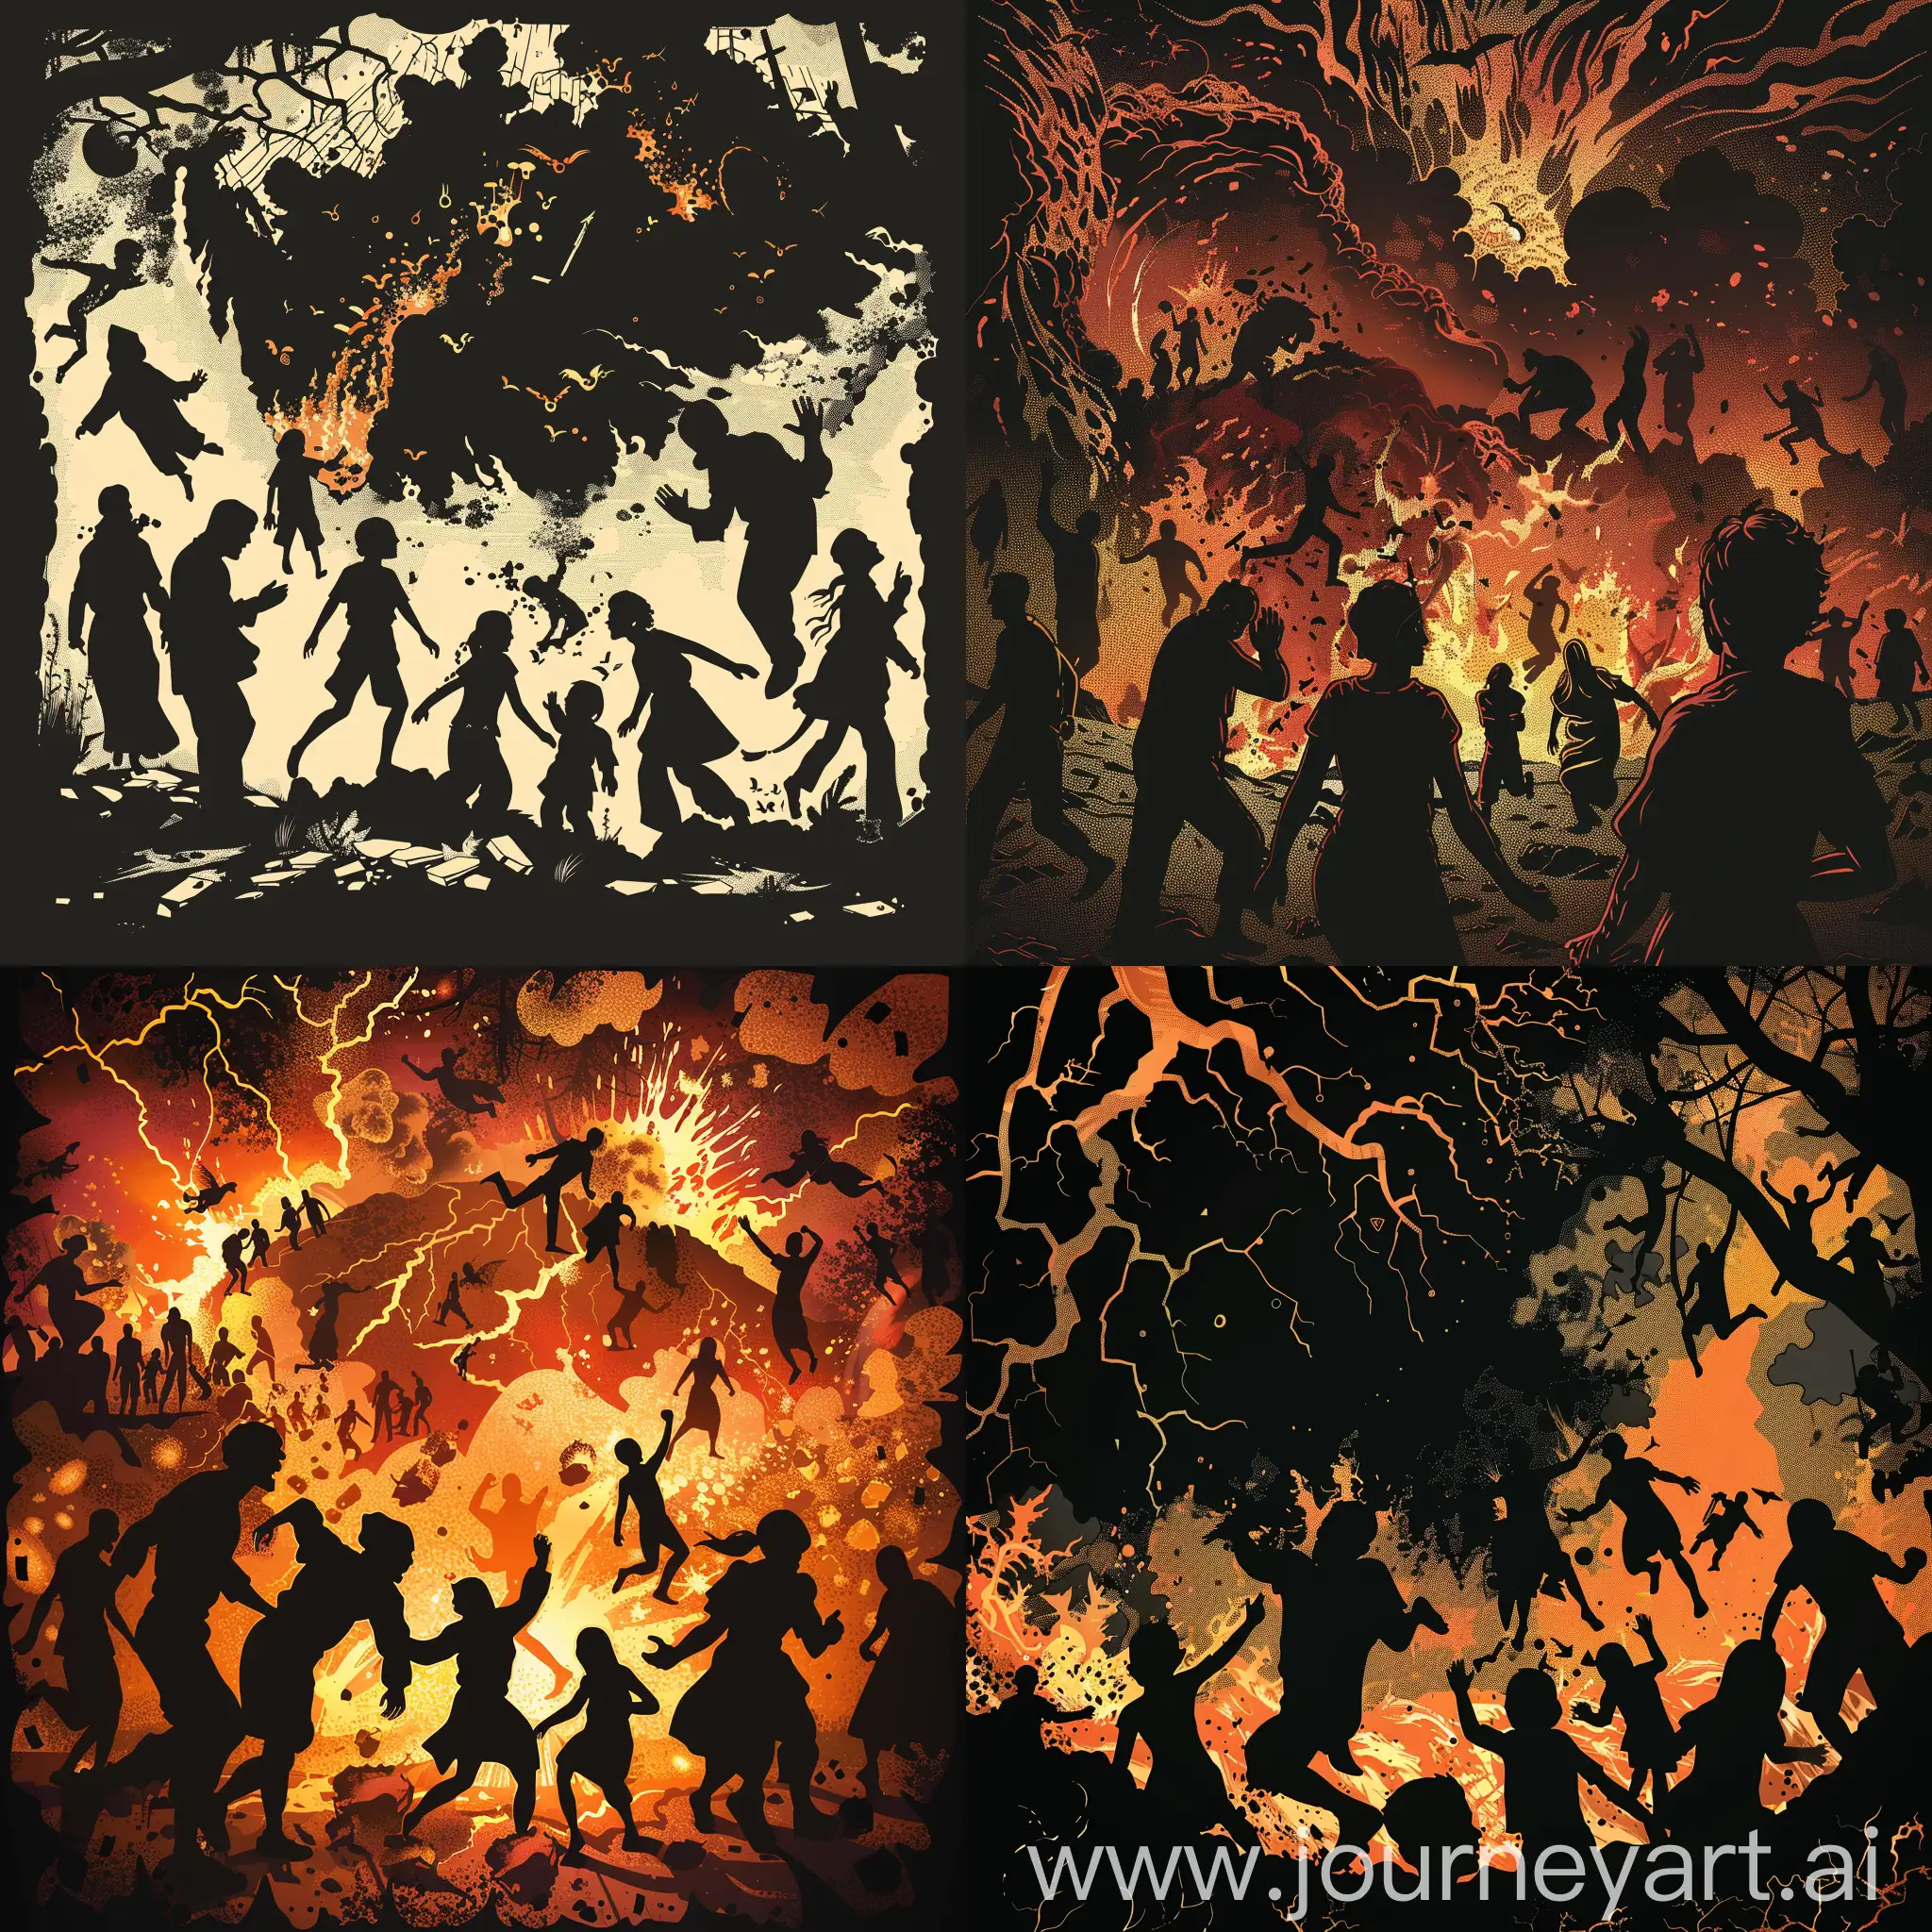 A silhouette scene of chaos and panic, with people fleeing in different directions, trying to escape the wrath of God. Some people are crying and praying, some are looking back in fear. The sky is dark . The earth is cracking and shaking, with fires and floods of molten fire erupting
